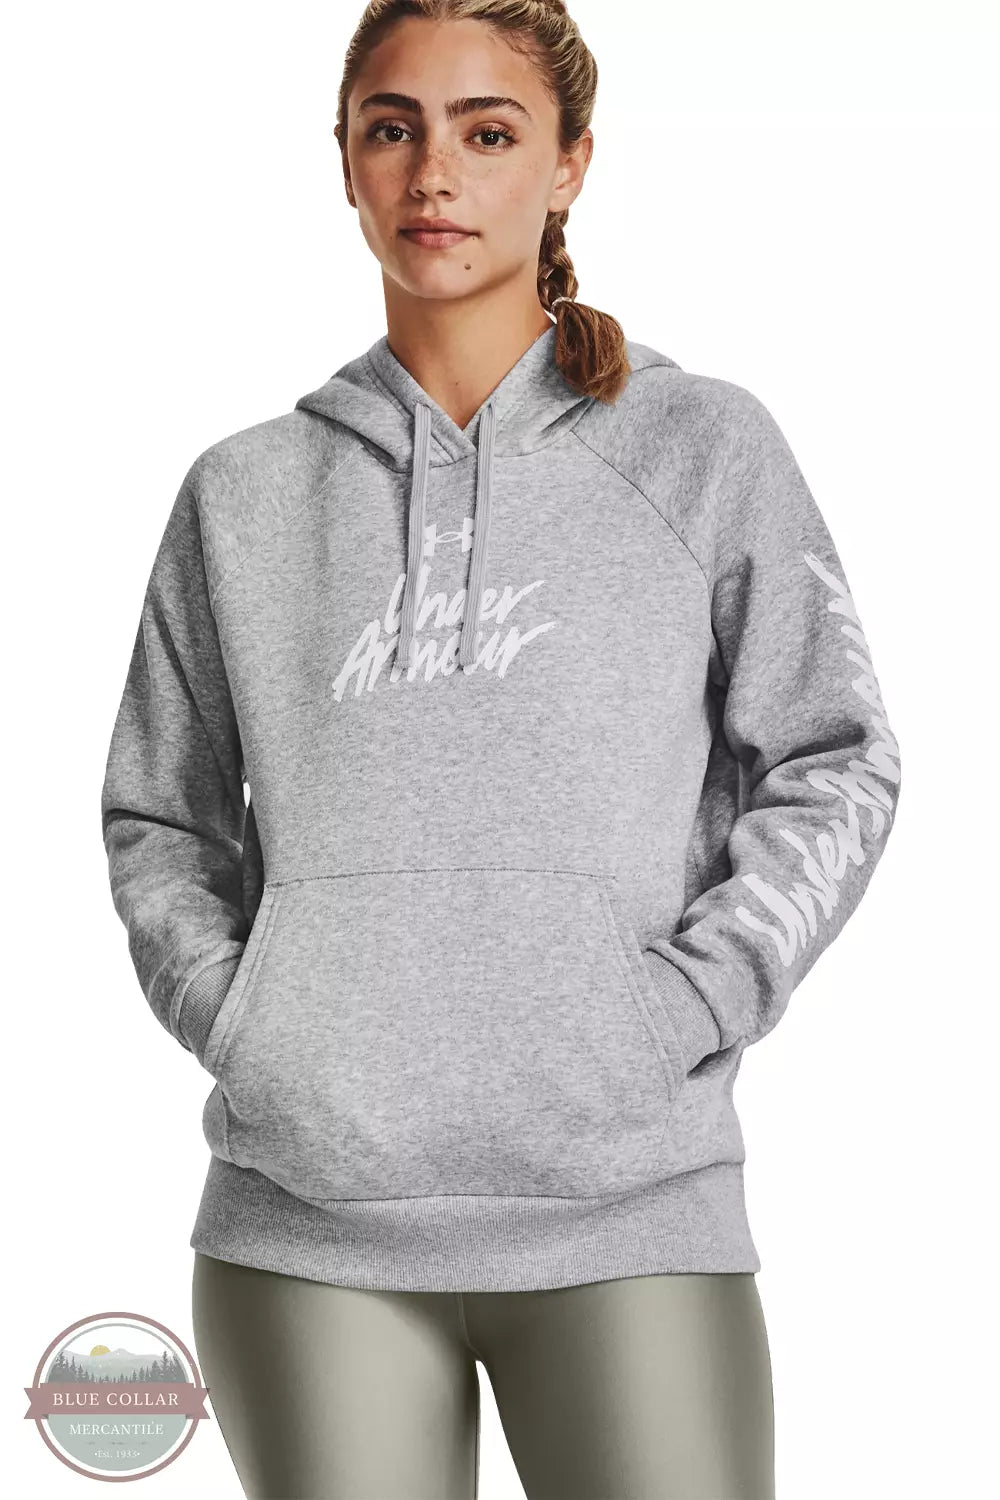 Under Armour 1379609-012 Rival Fleece Graphic Hoodie in Mod Gray Light Heather/White Front View